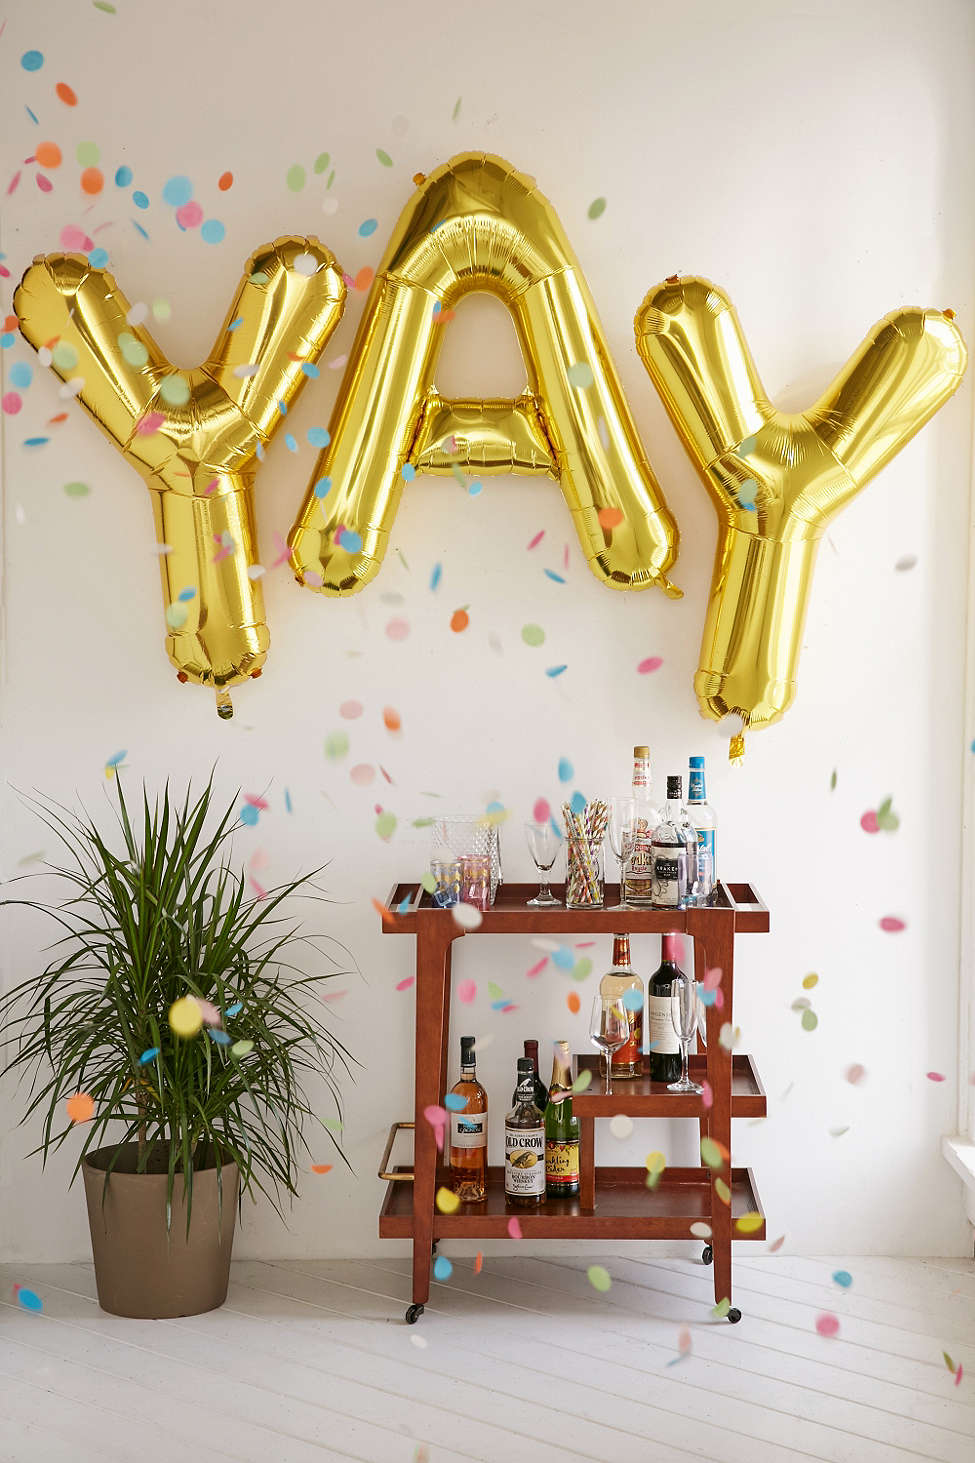 Gold party balloons from Urban Outfitters